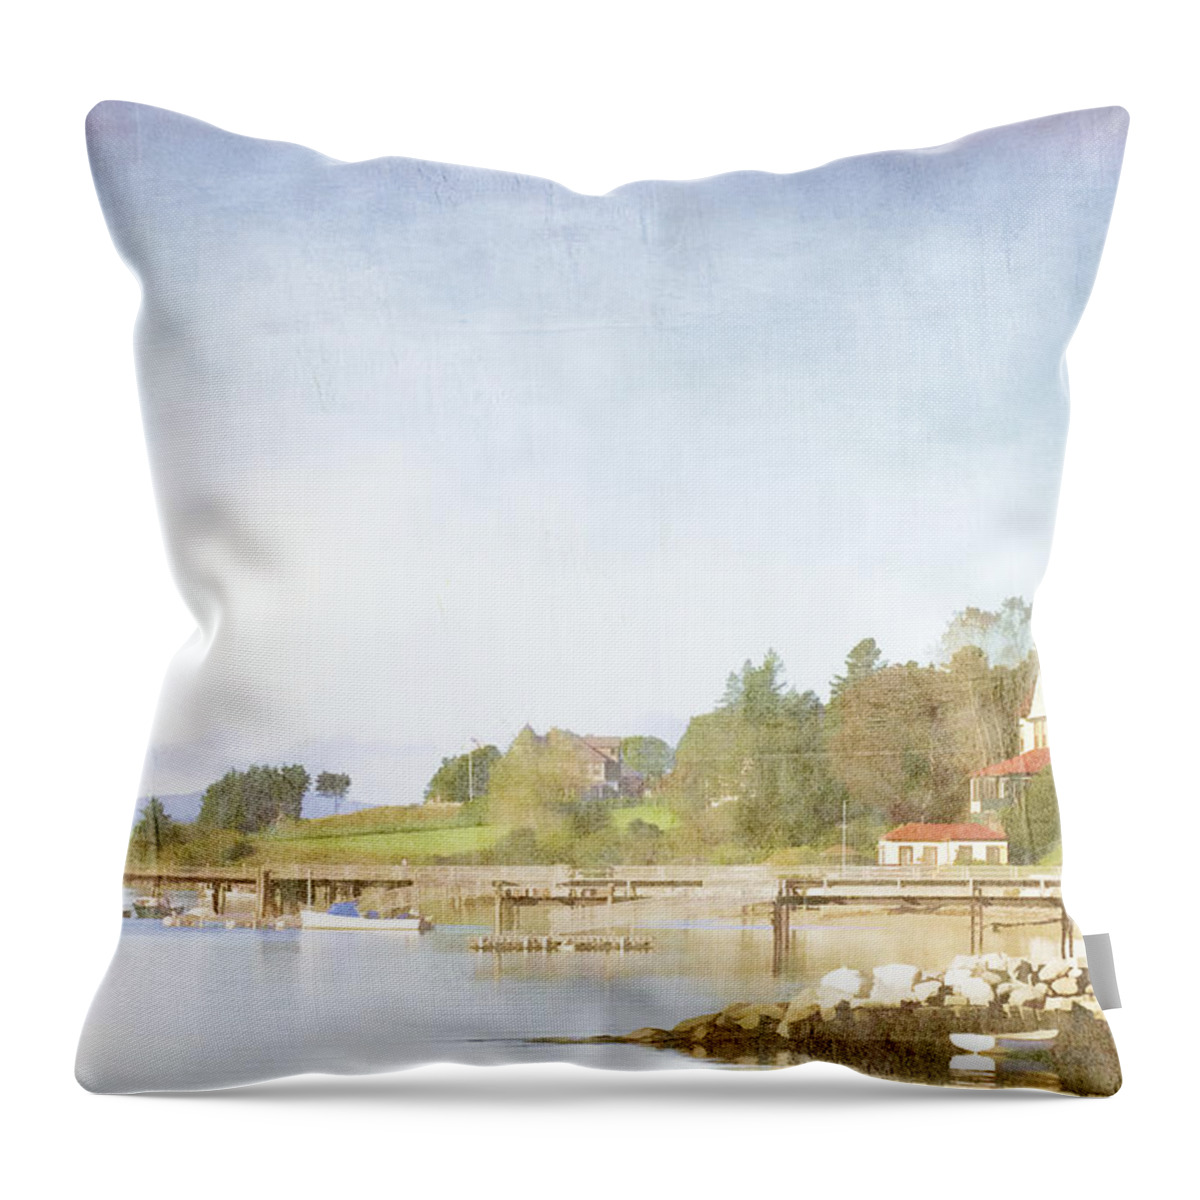 Castine Throw Pillow featuring the photograph Castine Harbor Maine by Carol Leigh